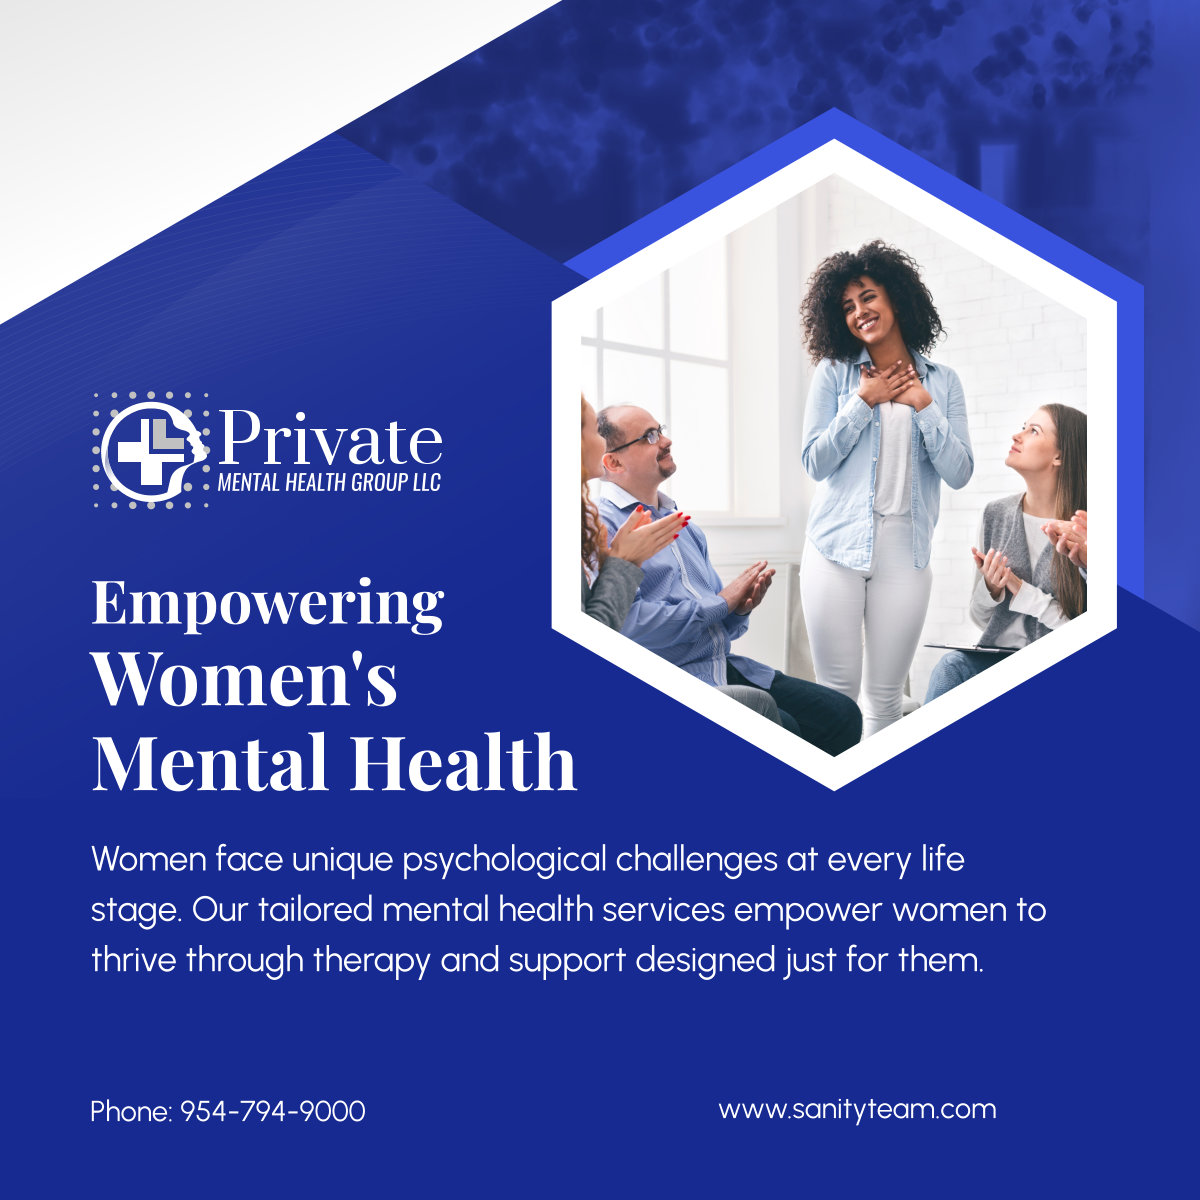 Explore women-focused mental health solutions with personalized therapy sessions and compassionate support, all aimed at nurturing your well-being and resilience.

#FortLauderdaleFL #MentalHealthCare #WomensHealth